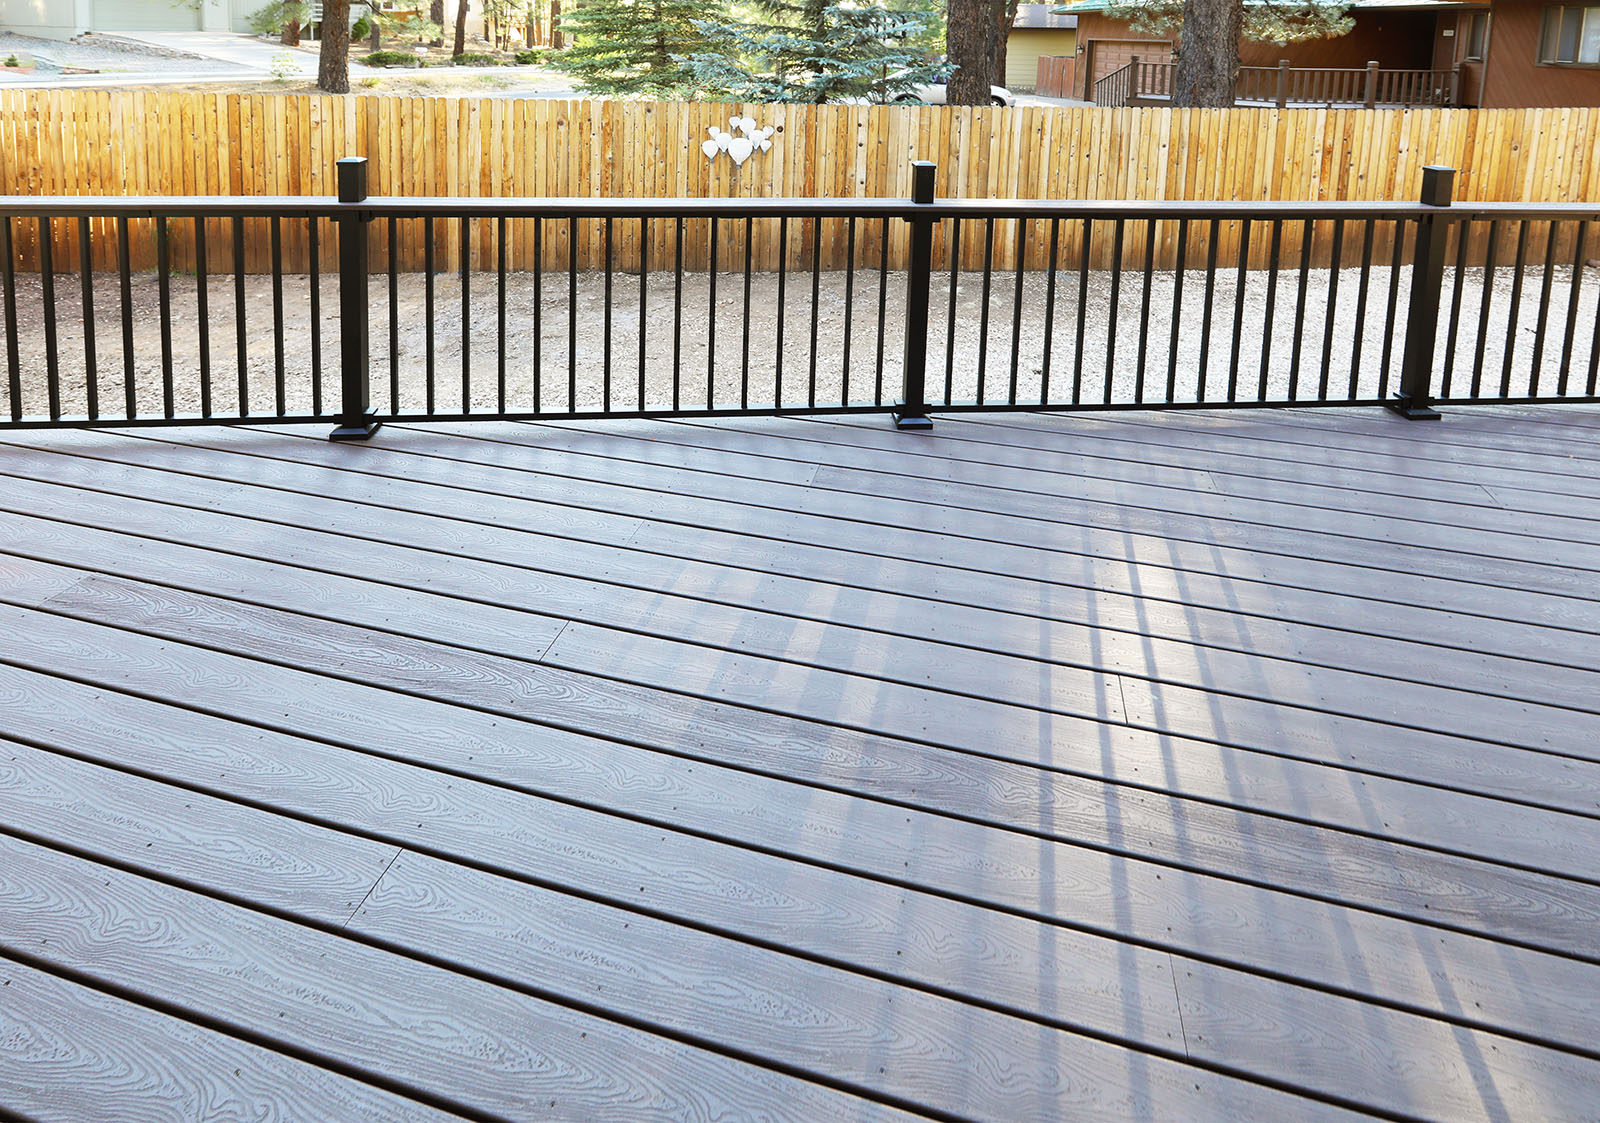 Trex deck with Trex Signature railing.  The deck is in Flagstaff Arizona